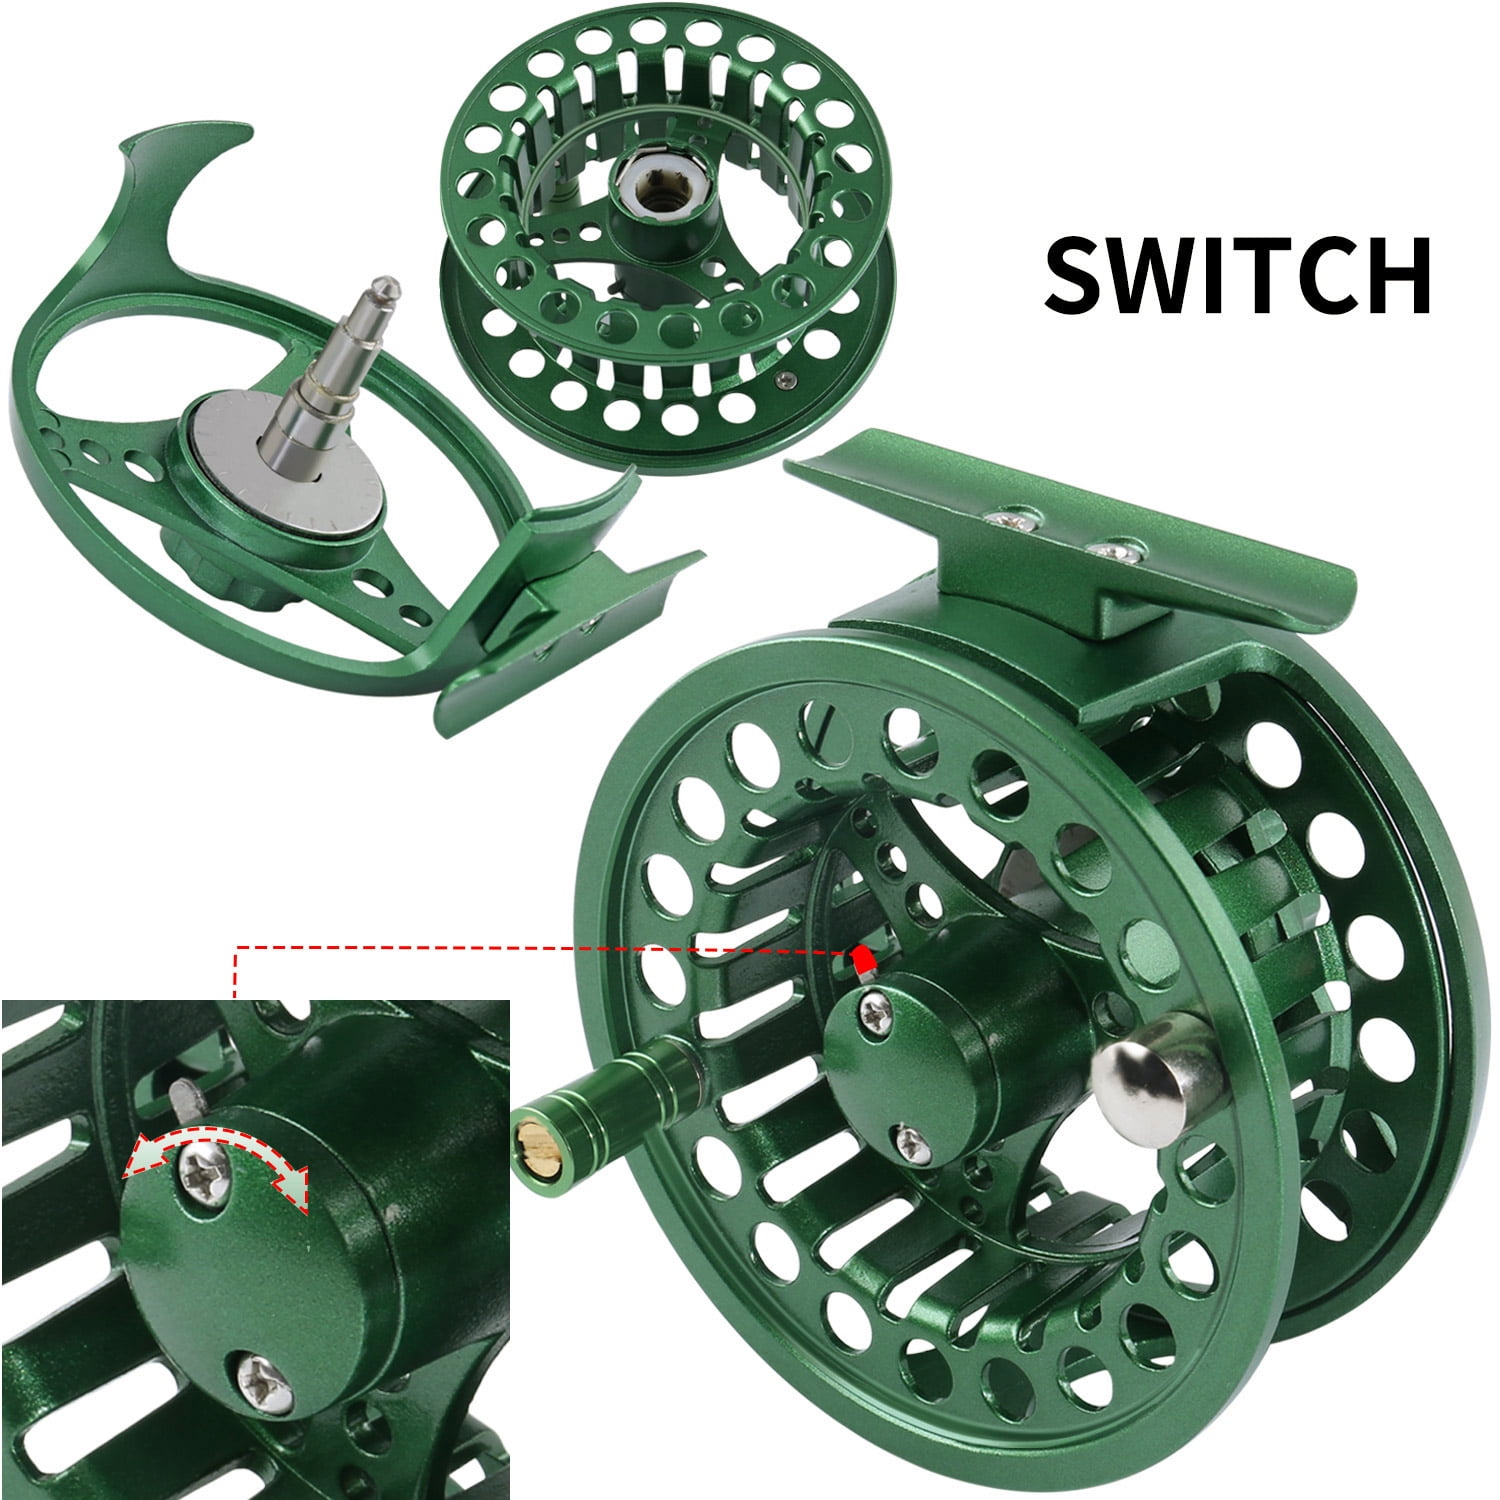 Fishing reels to include Ryobi Gilfin fly reel, Zebco 4040 skirted spool  spinning reel, and others.